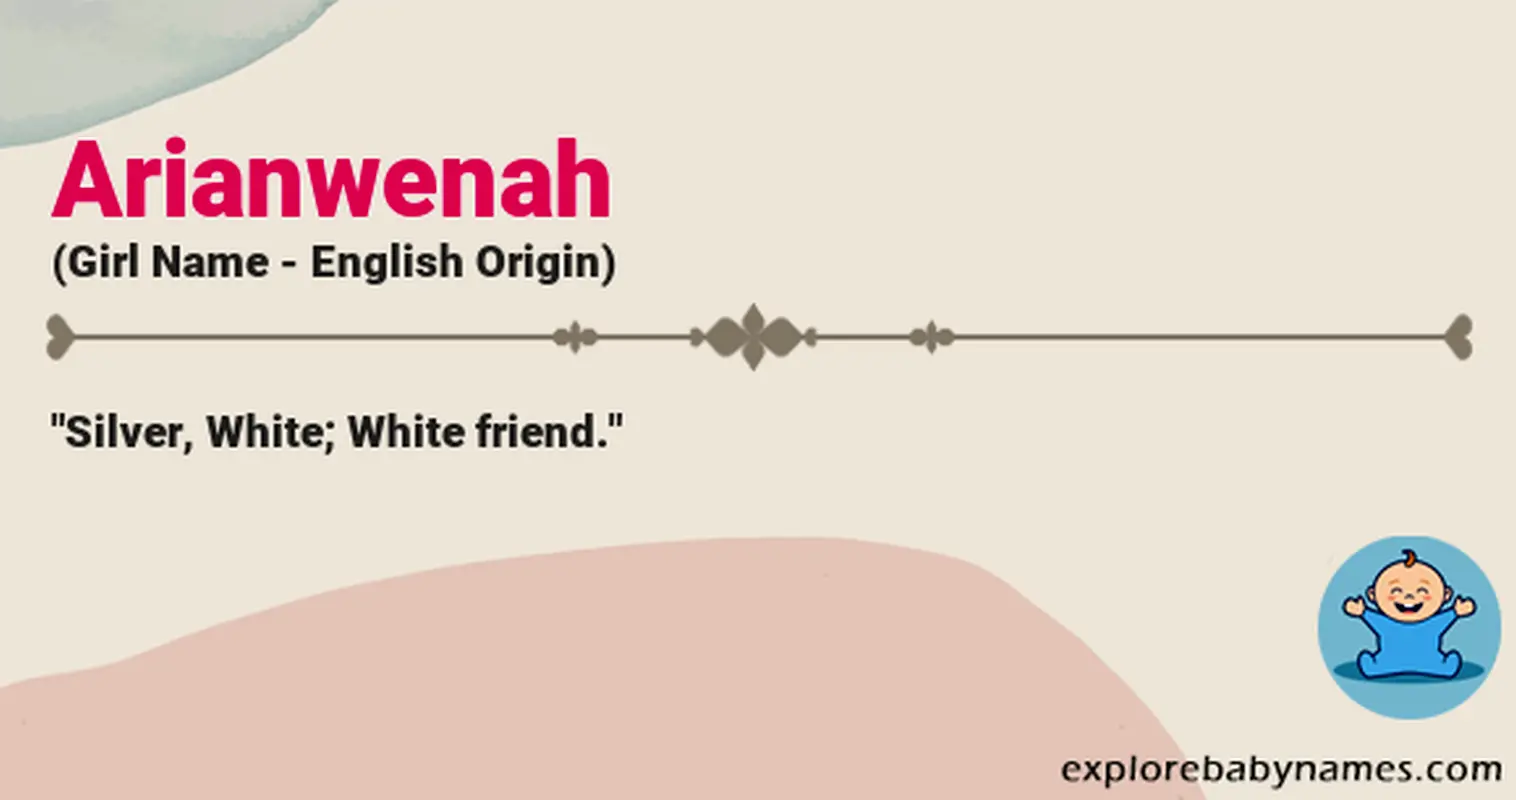 Meaning of Arianwenah